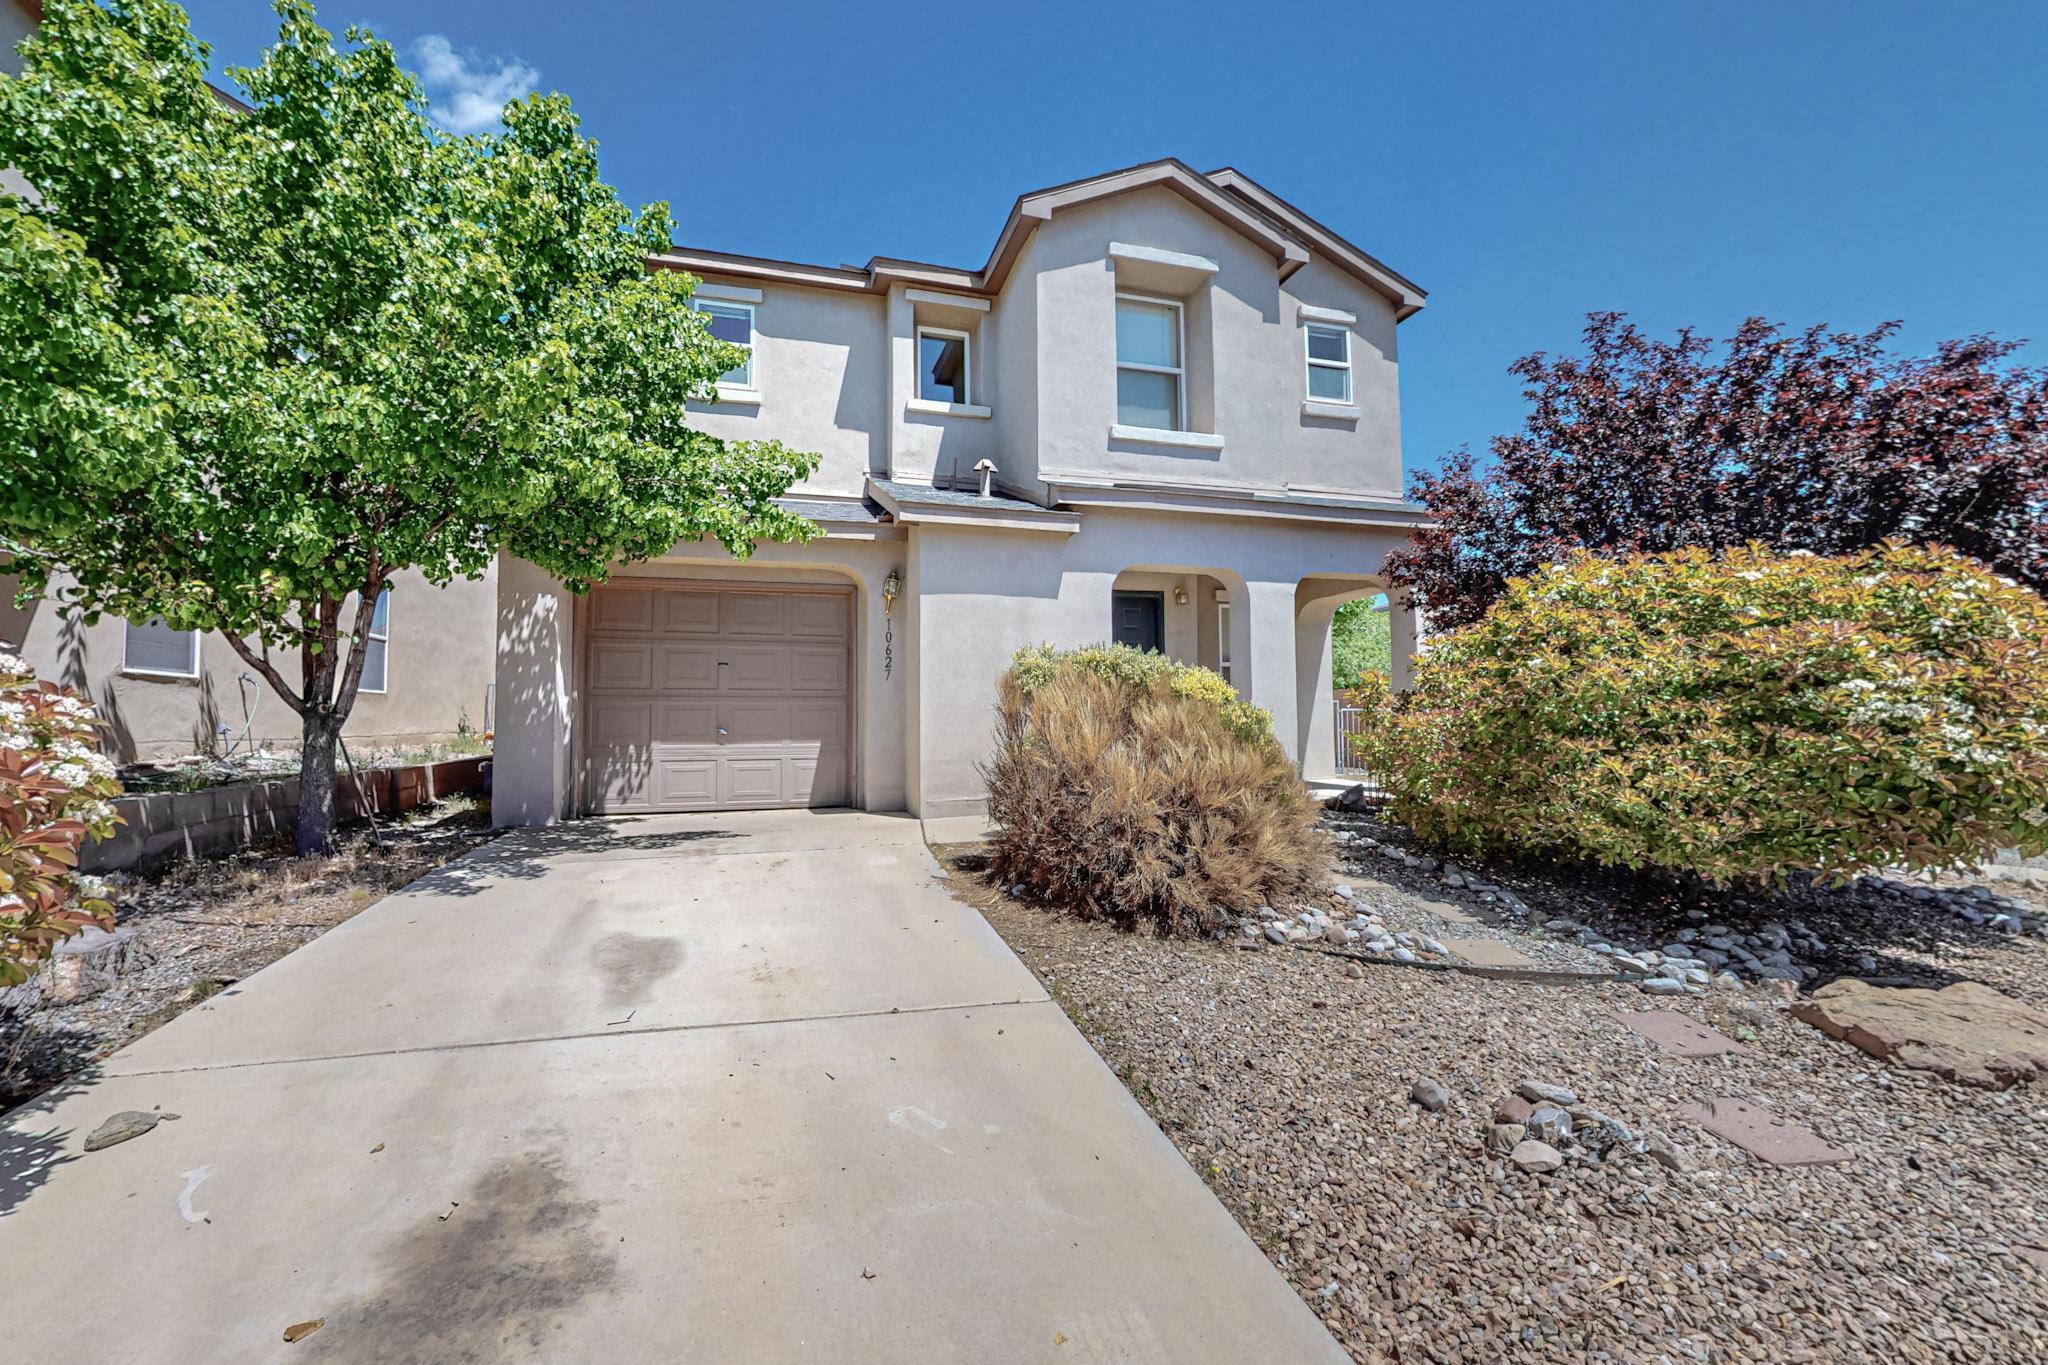 This home is in the desirable Orchards at Anderson Heights neighborhood. This private gated community comes with a refreshing community swimming pool and a community park. This two story home is a gem! equipped with refrigerated air to keep you cool during the summer